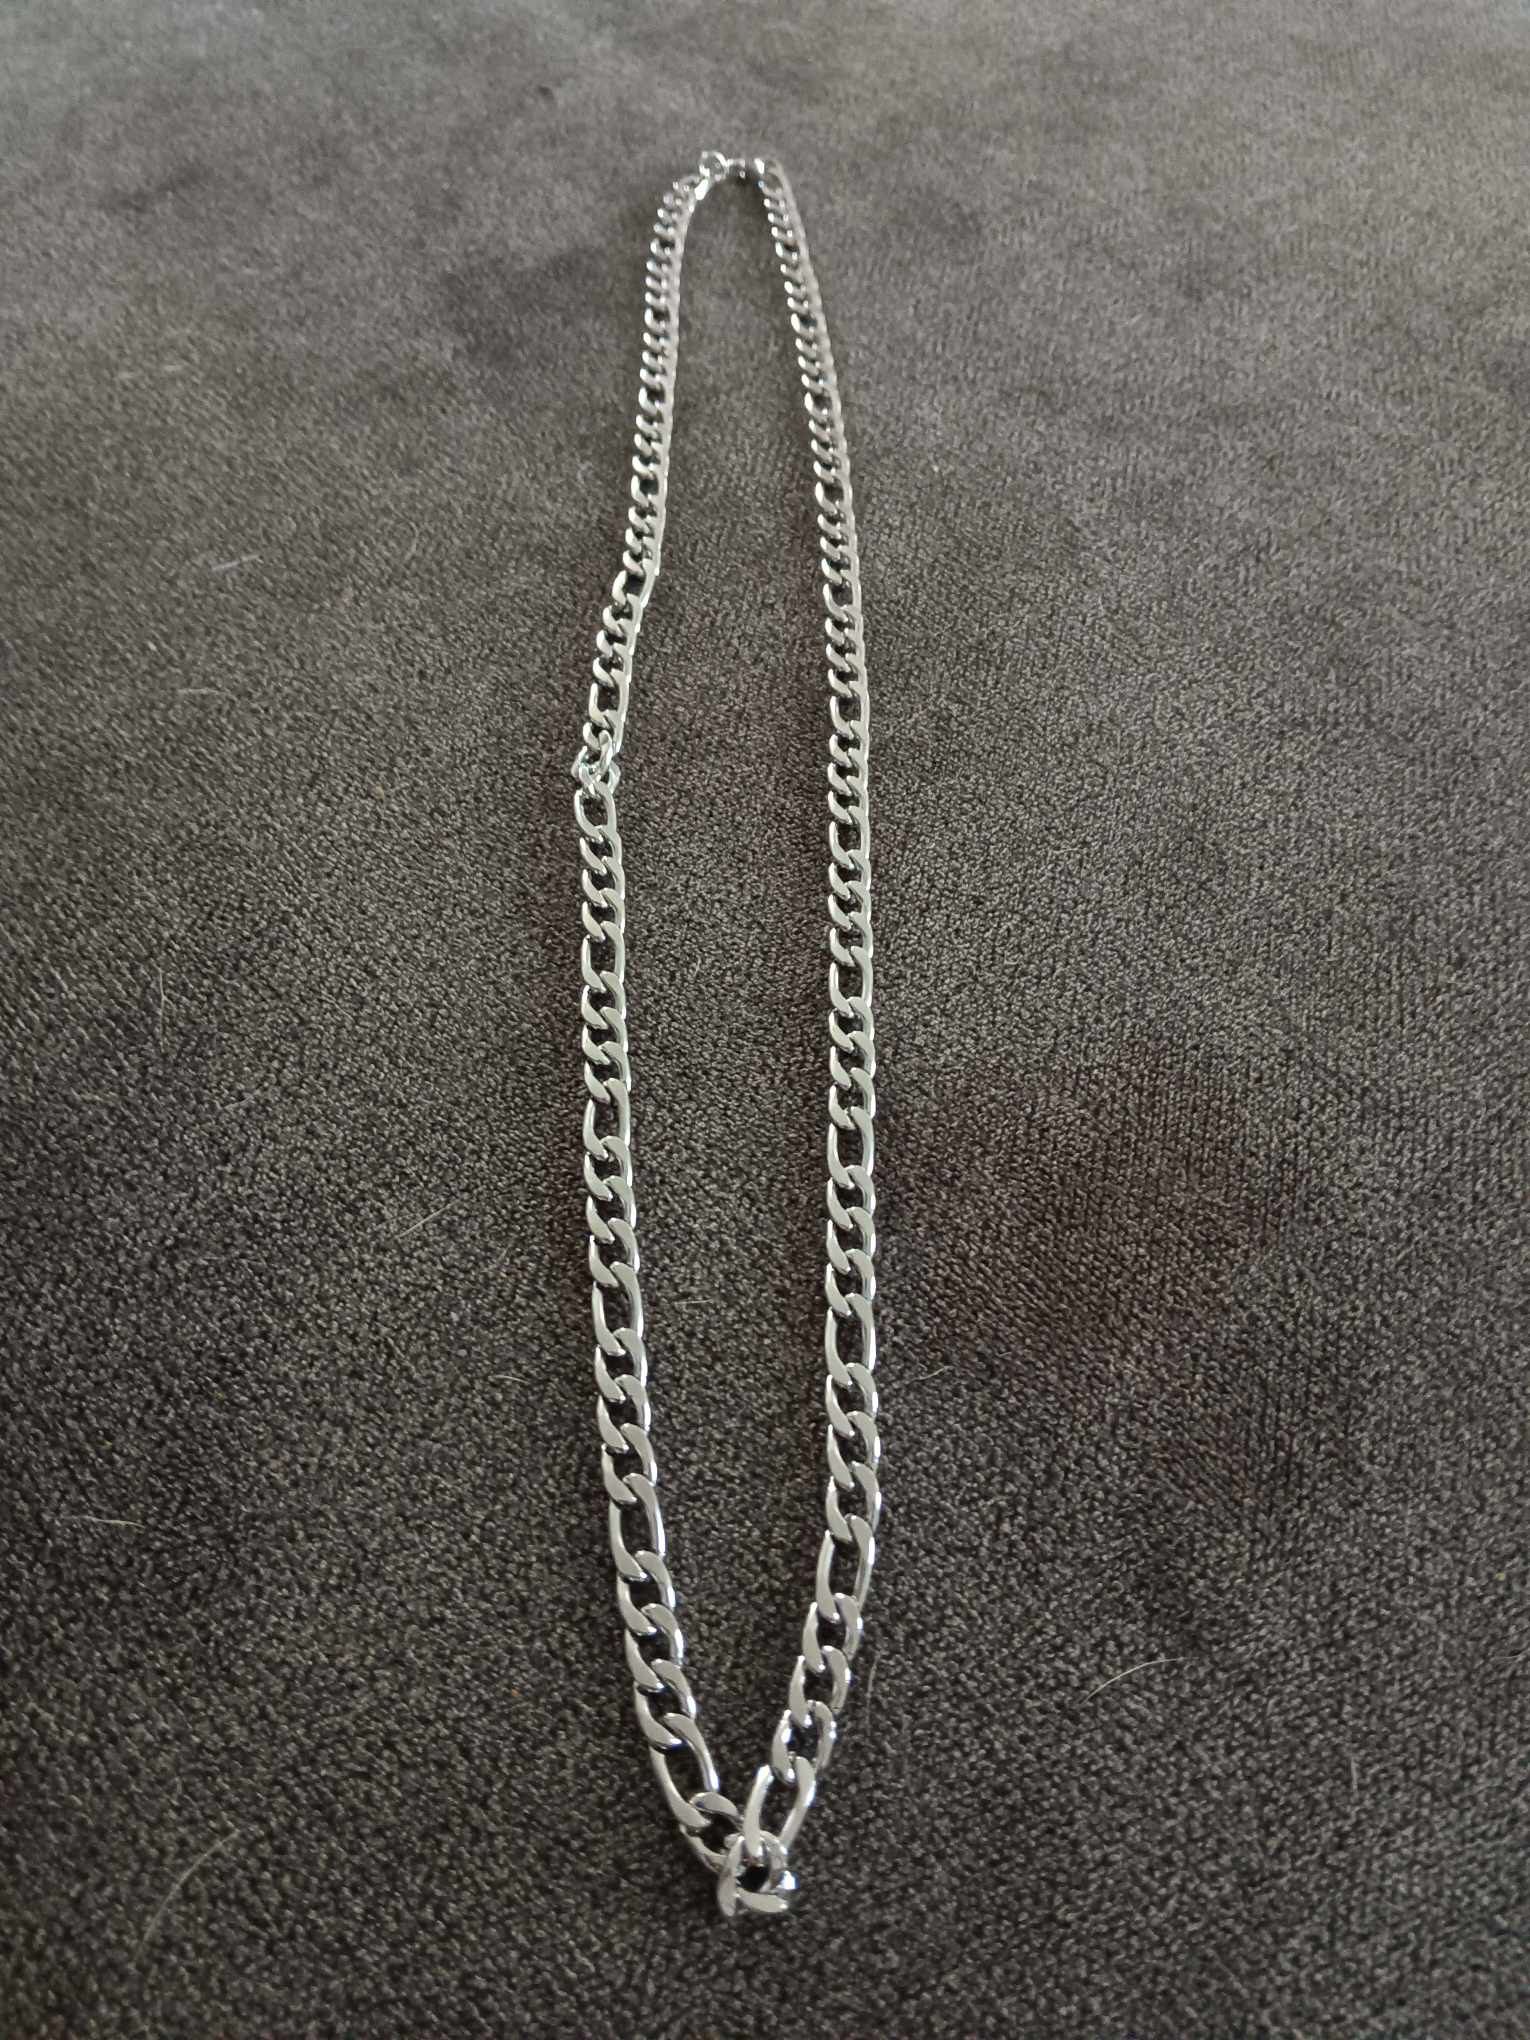 26” Mens Figaro Stainless Steel Necklace 